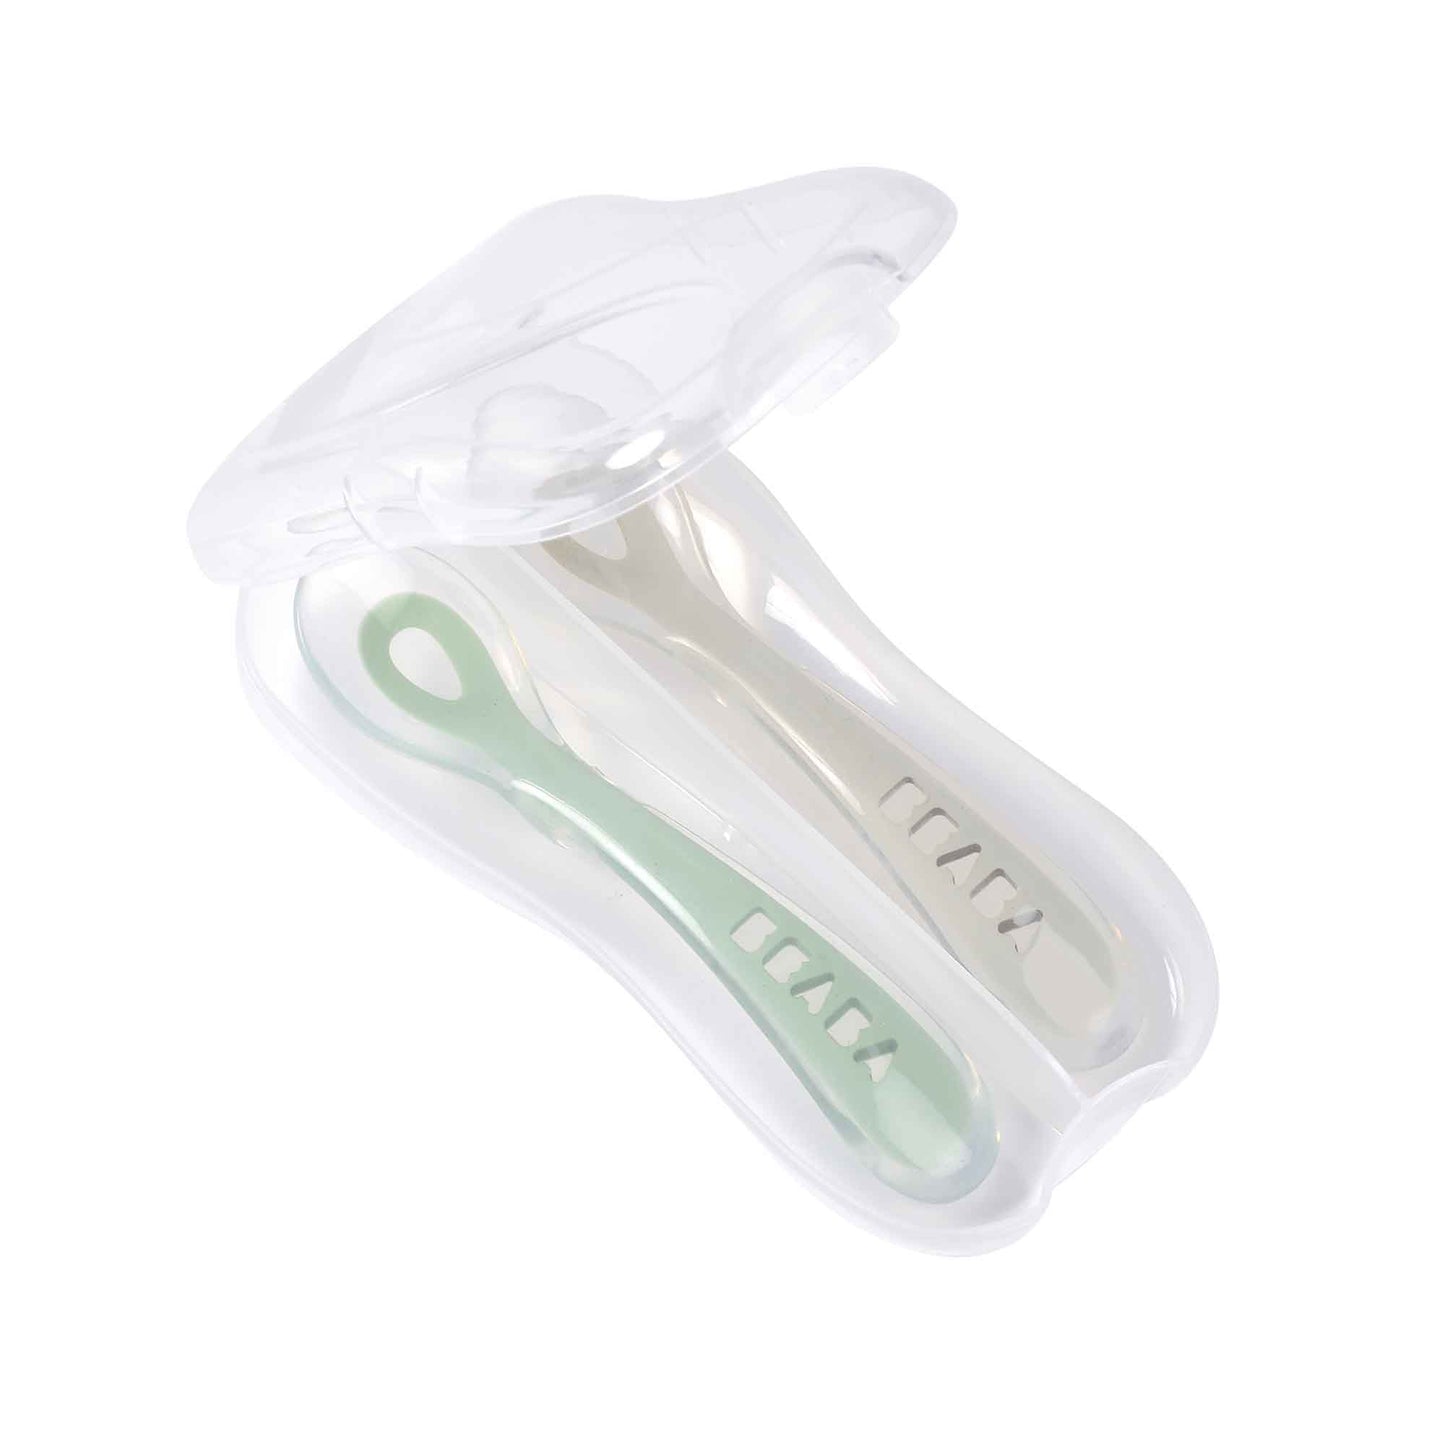 Beaba Set of 2 1st Age Silicone Spoon with Carry Case (Green/Grey)